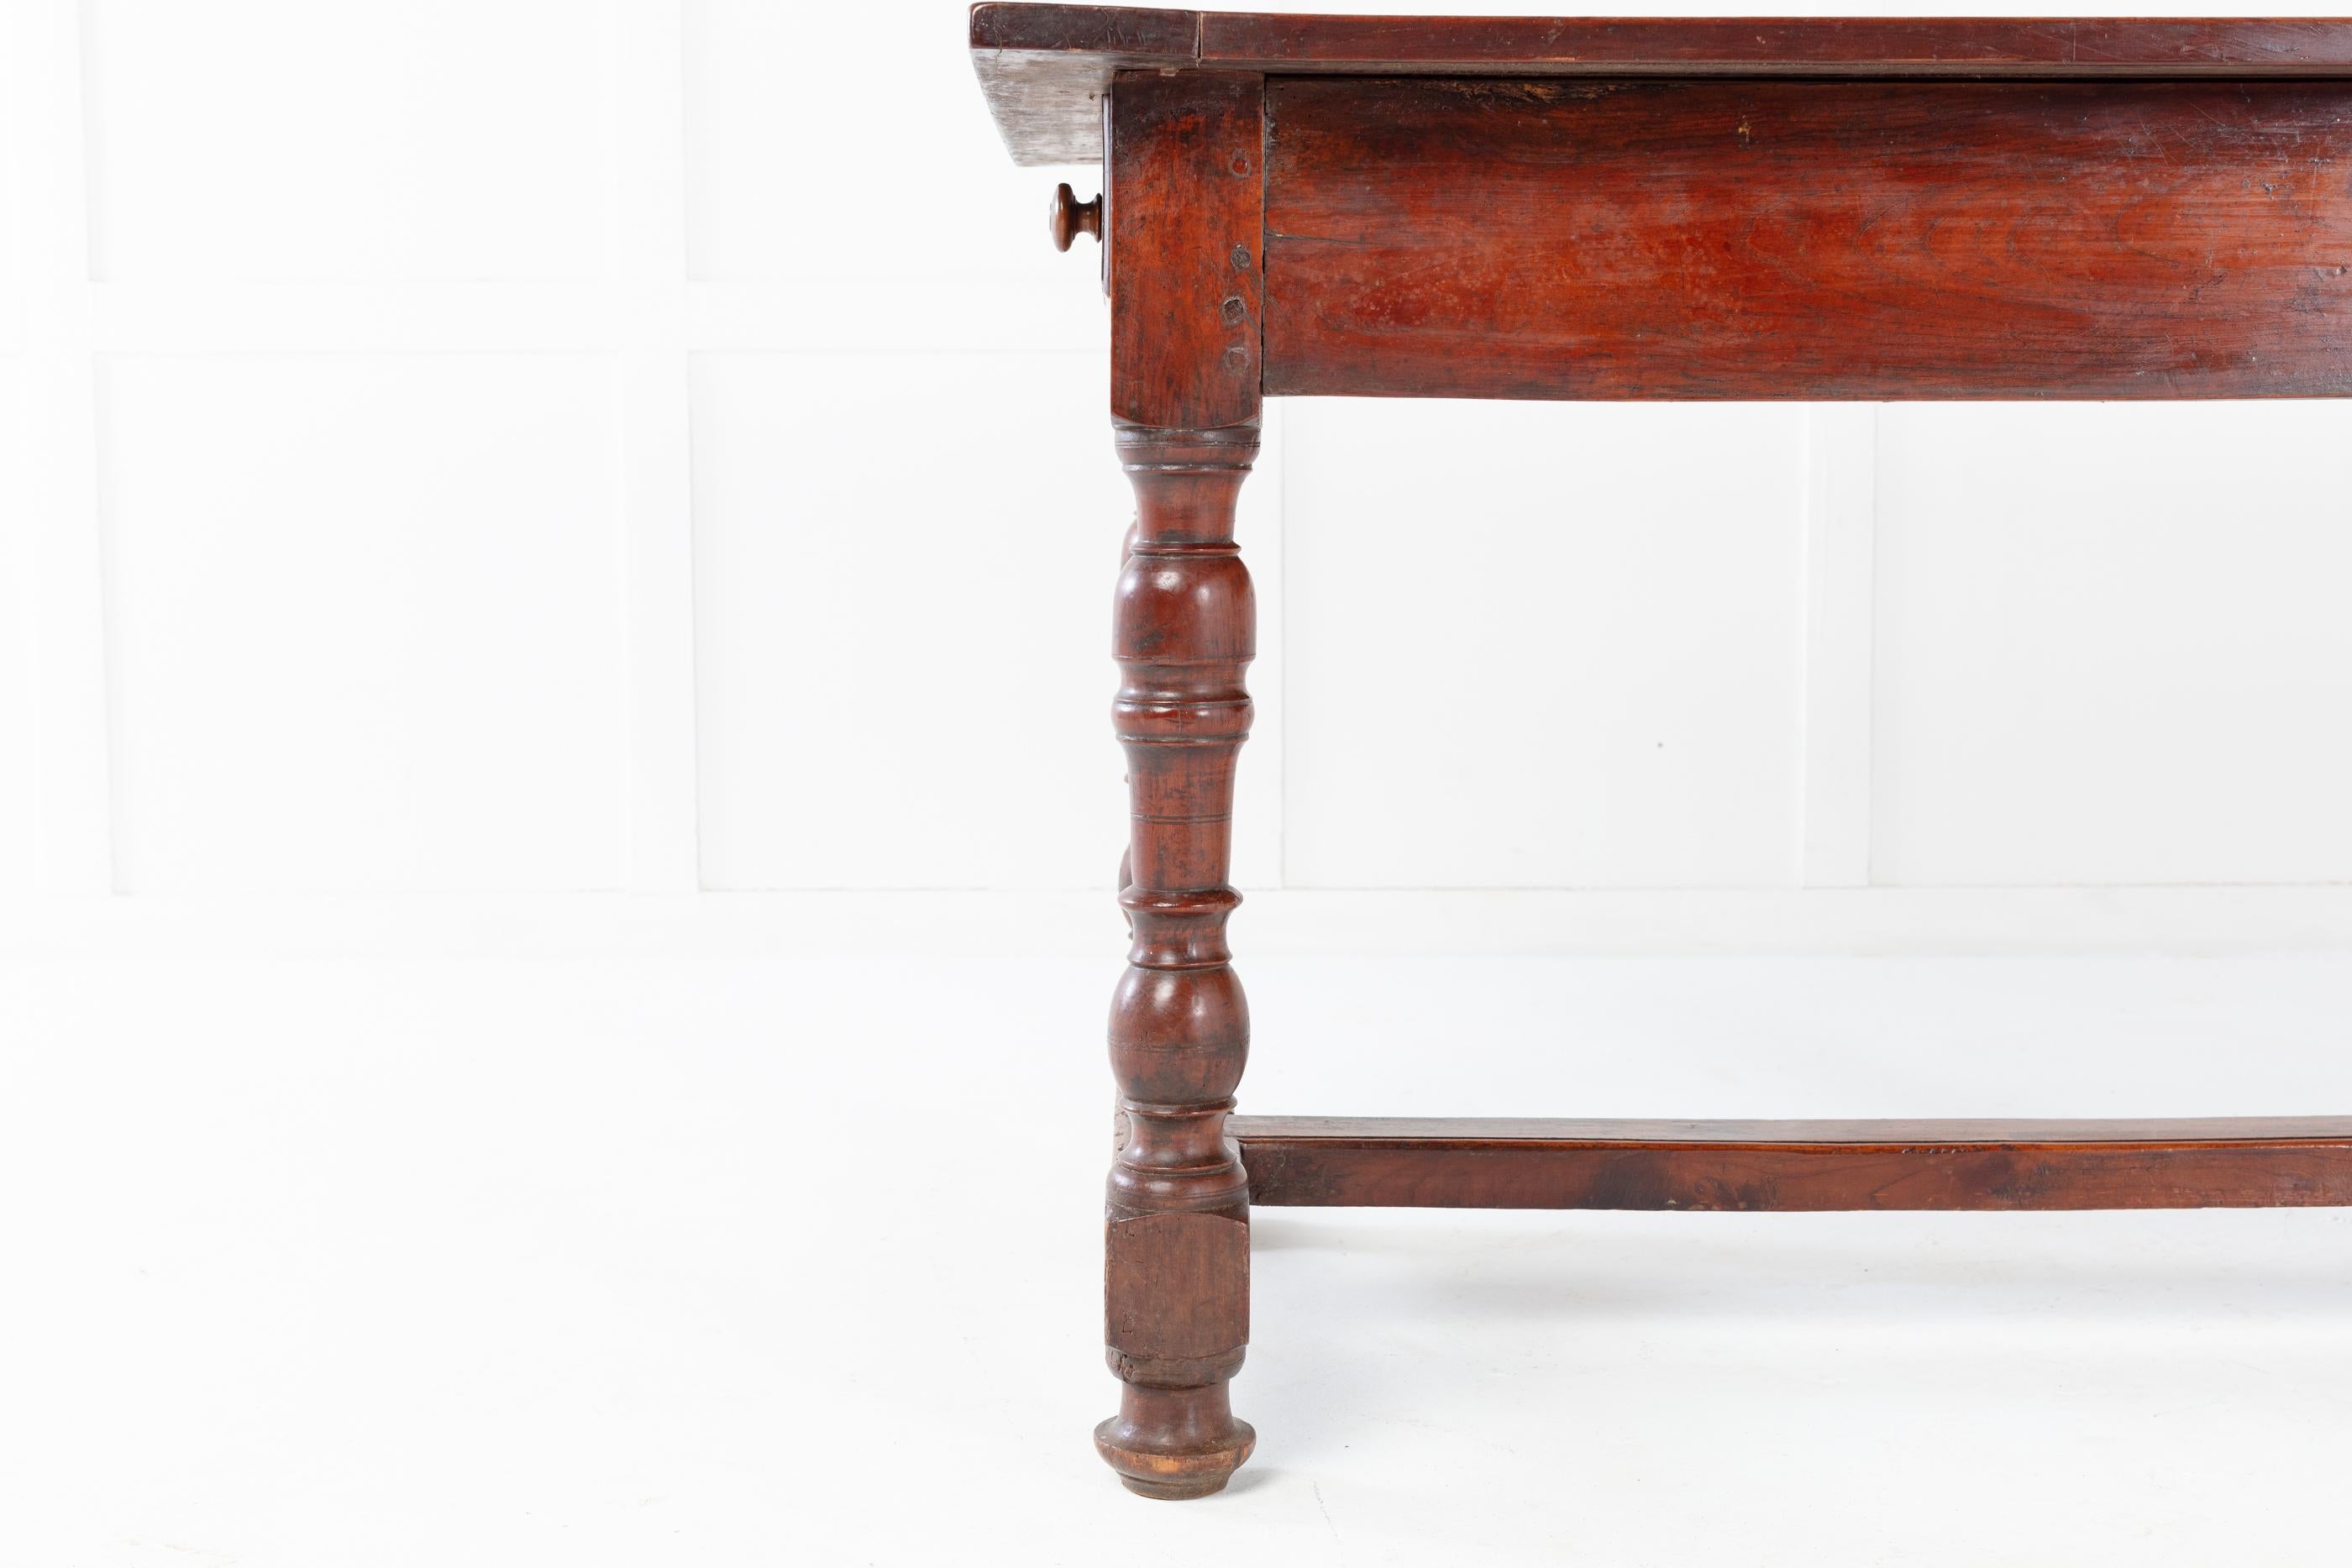 18th century French cherrywood dining table with two drawers, one at each end, supported by turned legs. The middle stretcher and central leg have been replaced at sometime in its life, due to age and use.

This table has wonderful original